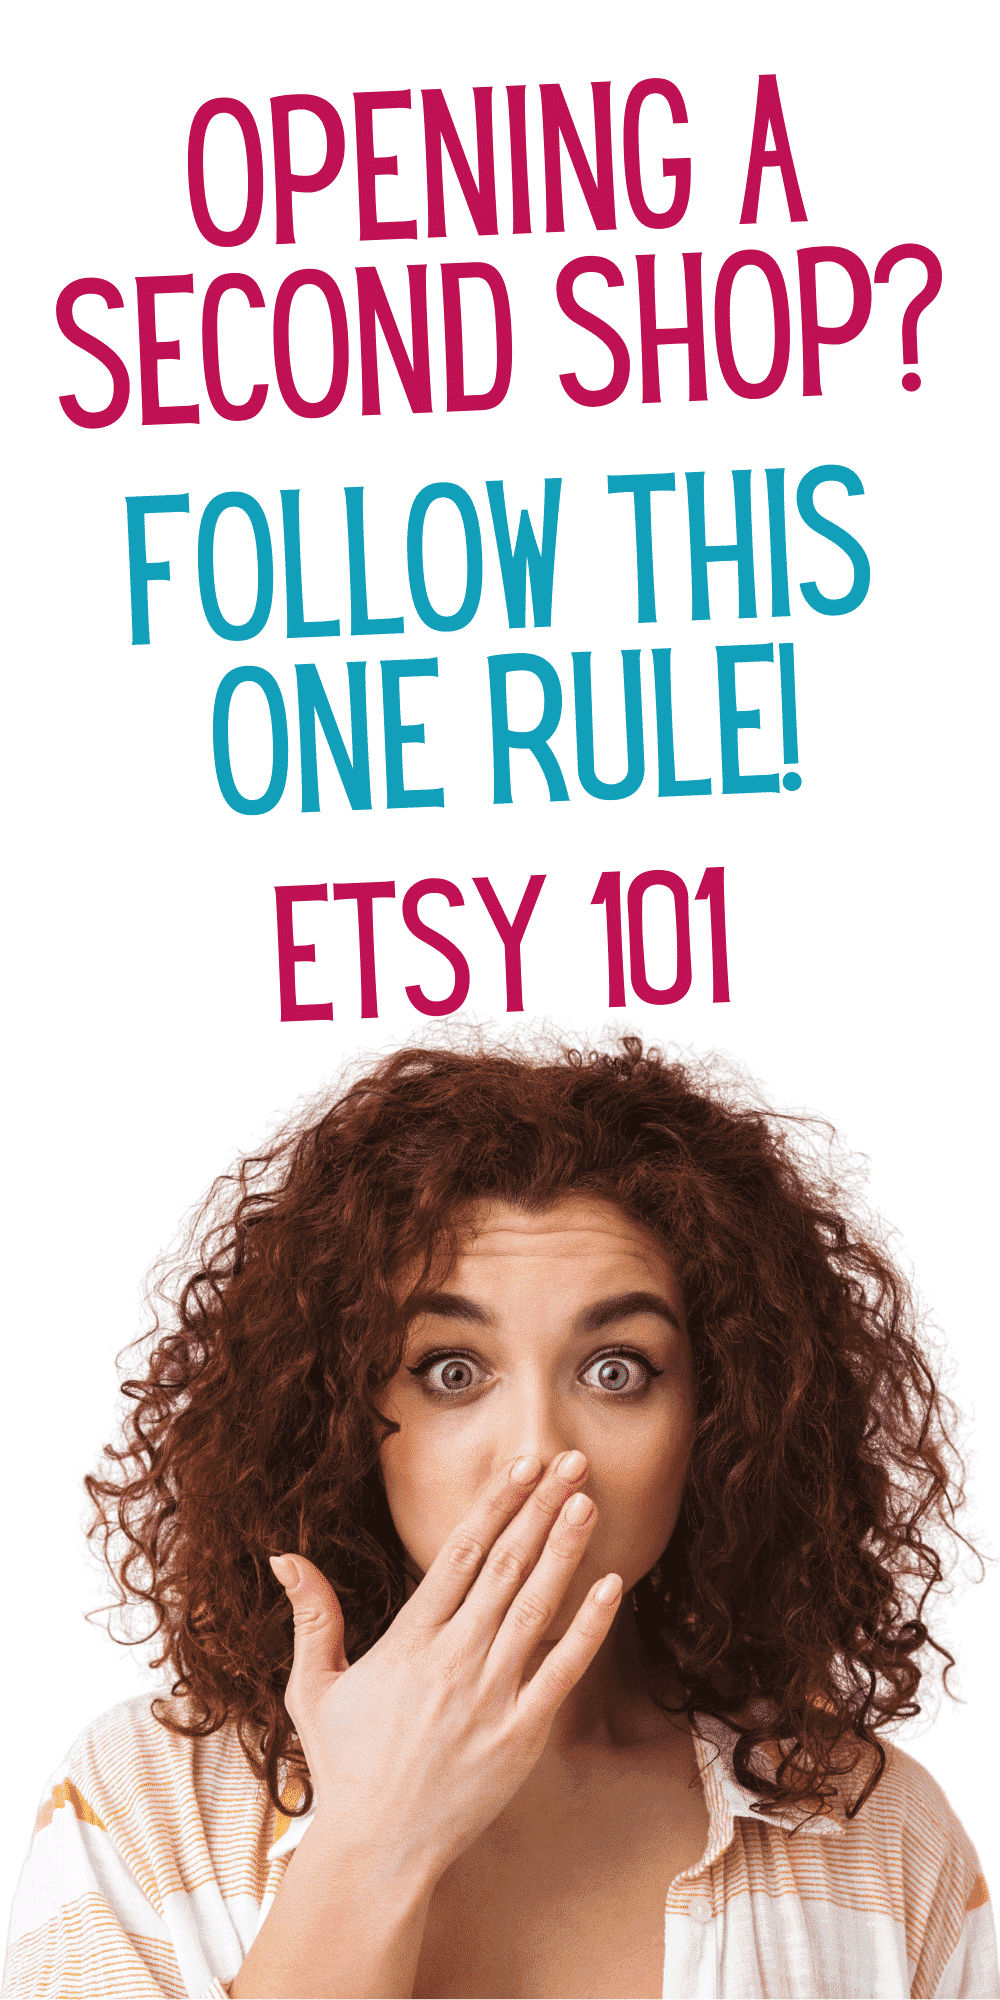 Two Etsy Shops? Avoid Getting Your Shop Shut Down by Following This Rule